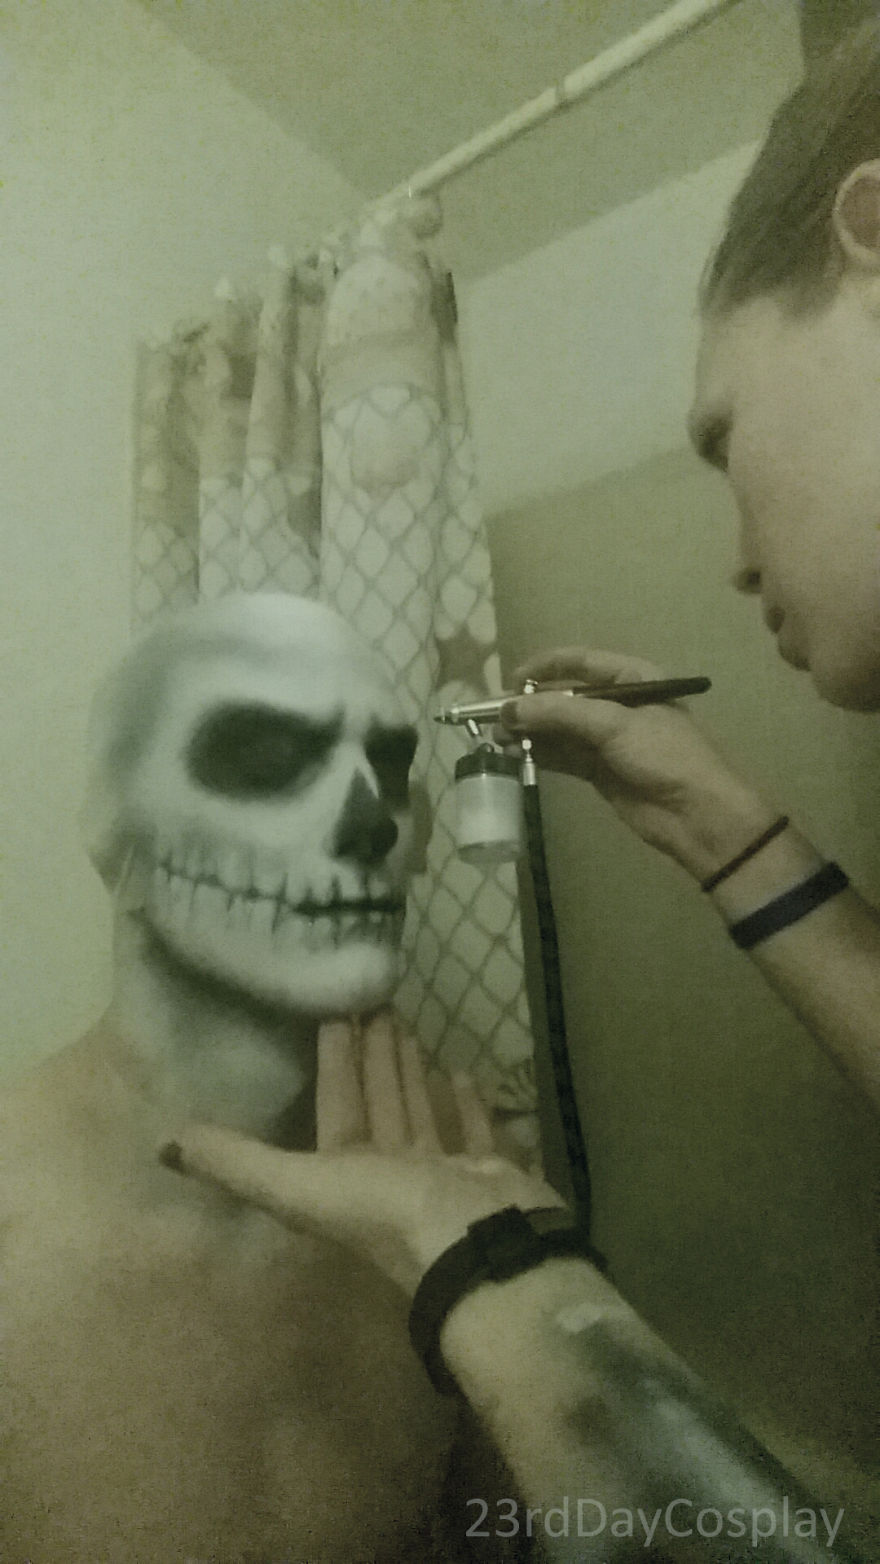 My DIY Jack Skellington Cosplay Inspired By A Movie I Haven't Seen